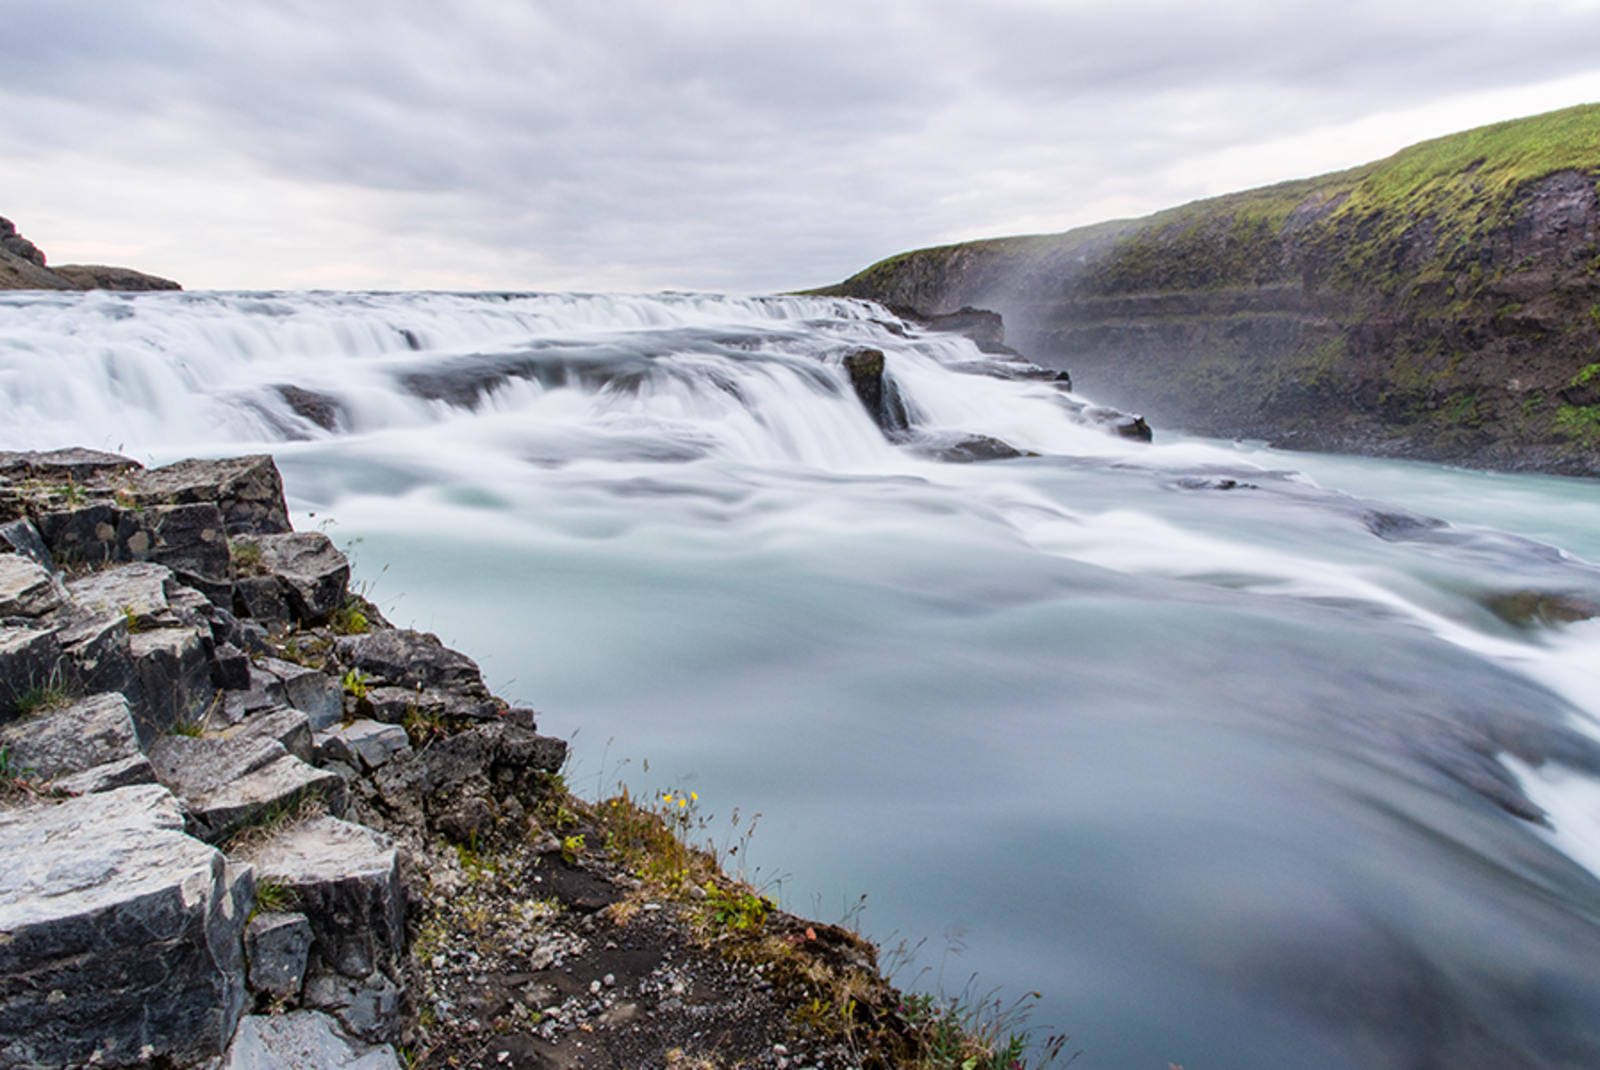 5-Day Itinerary to Explore Iceland’s Natural Beauty - Day 3: Exploring the Golden Circle